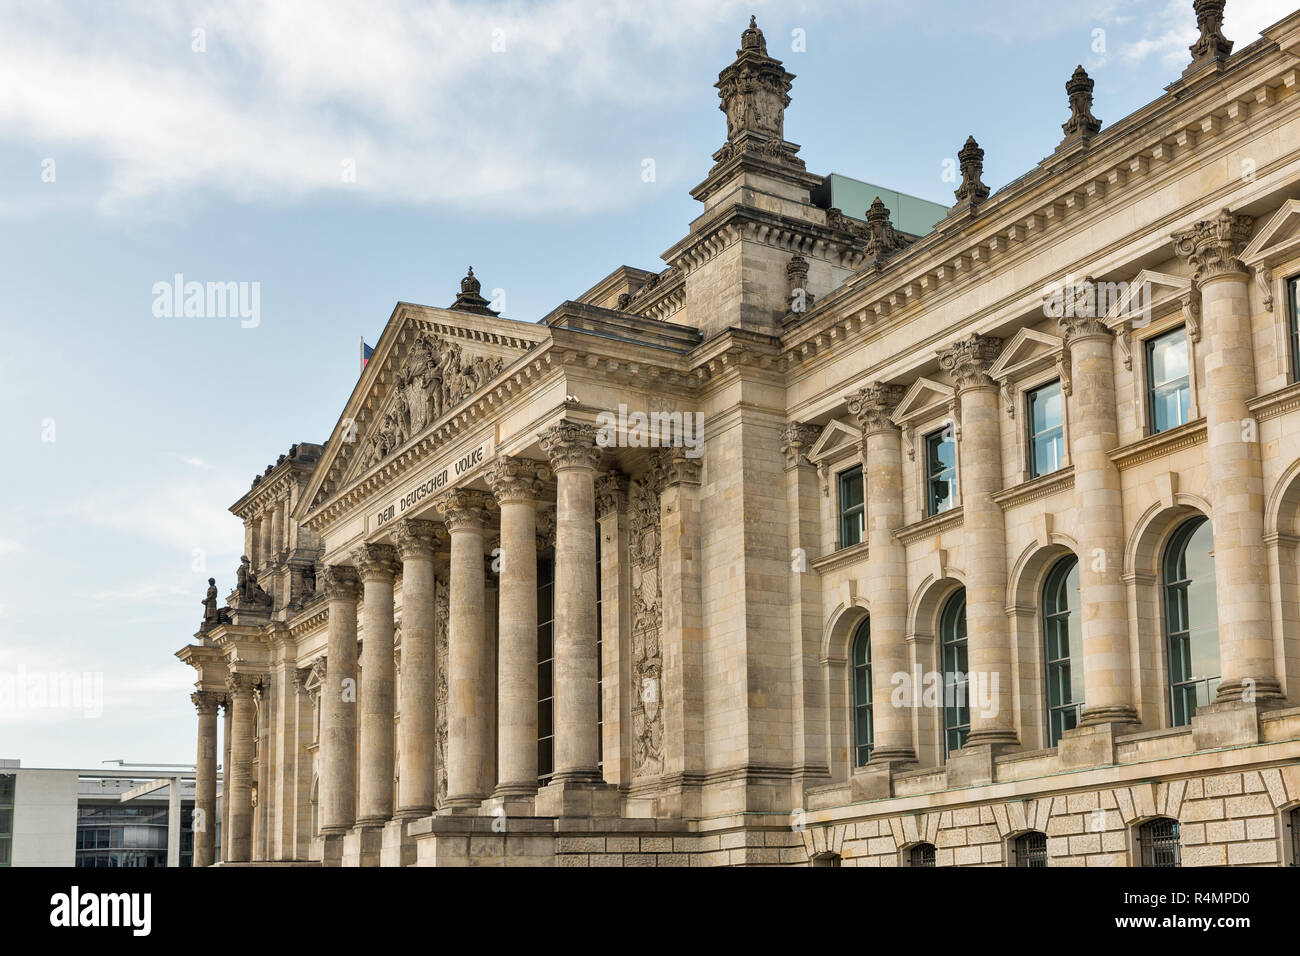 Famous Reichstag or Bundestag building, seat of the German Parliament. Berlin Mitte district, Germany. Stock Photo